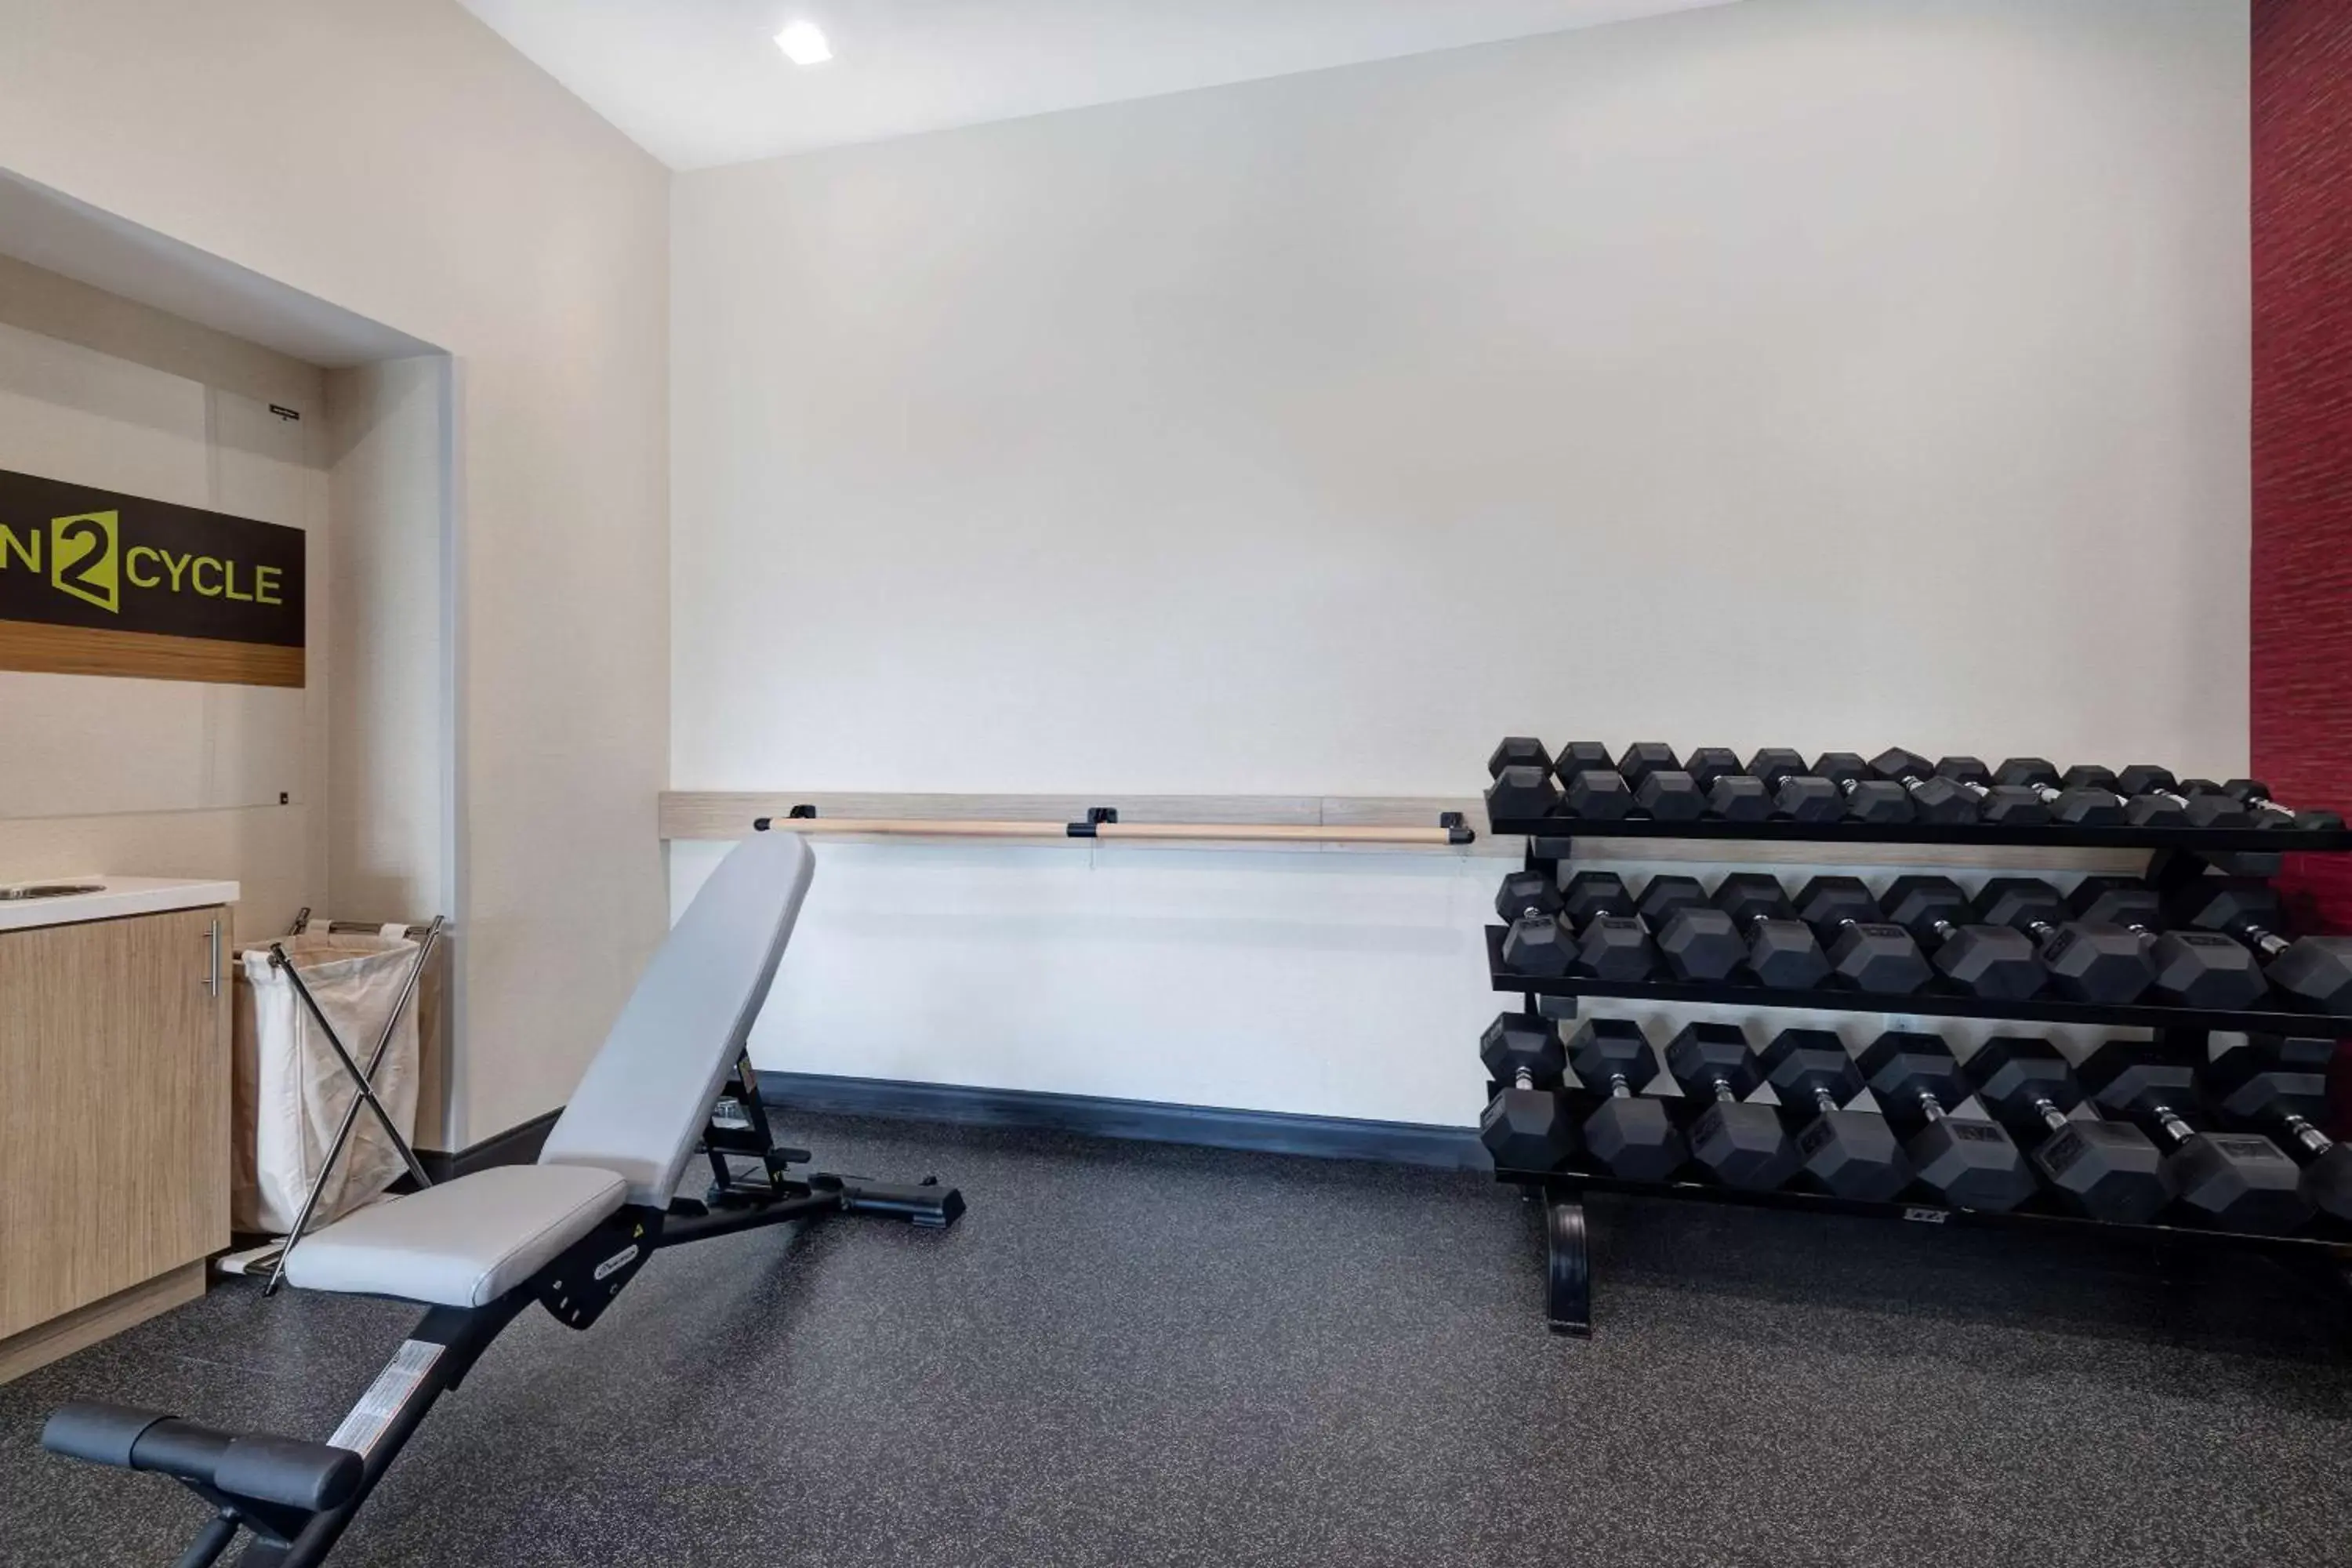 Fitness centre/facilities, Fitness Center/Facilities in Home2 Suites Galveston, Tx